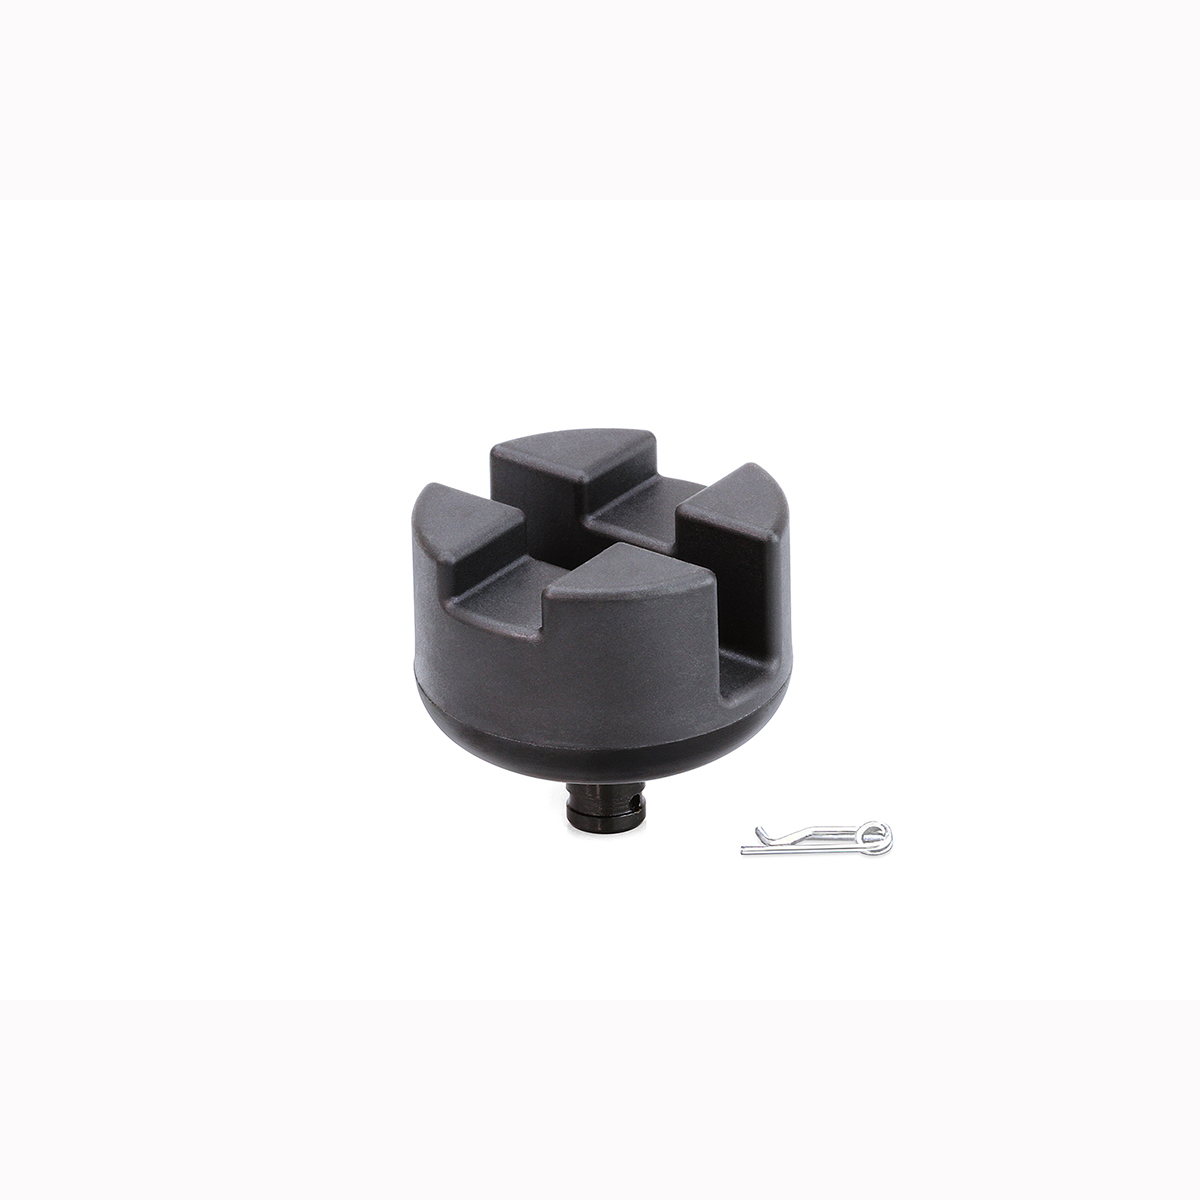 BAL jack up for adaptor plus No.1390